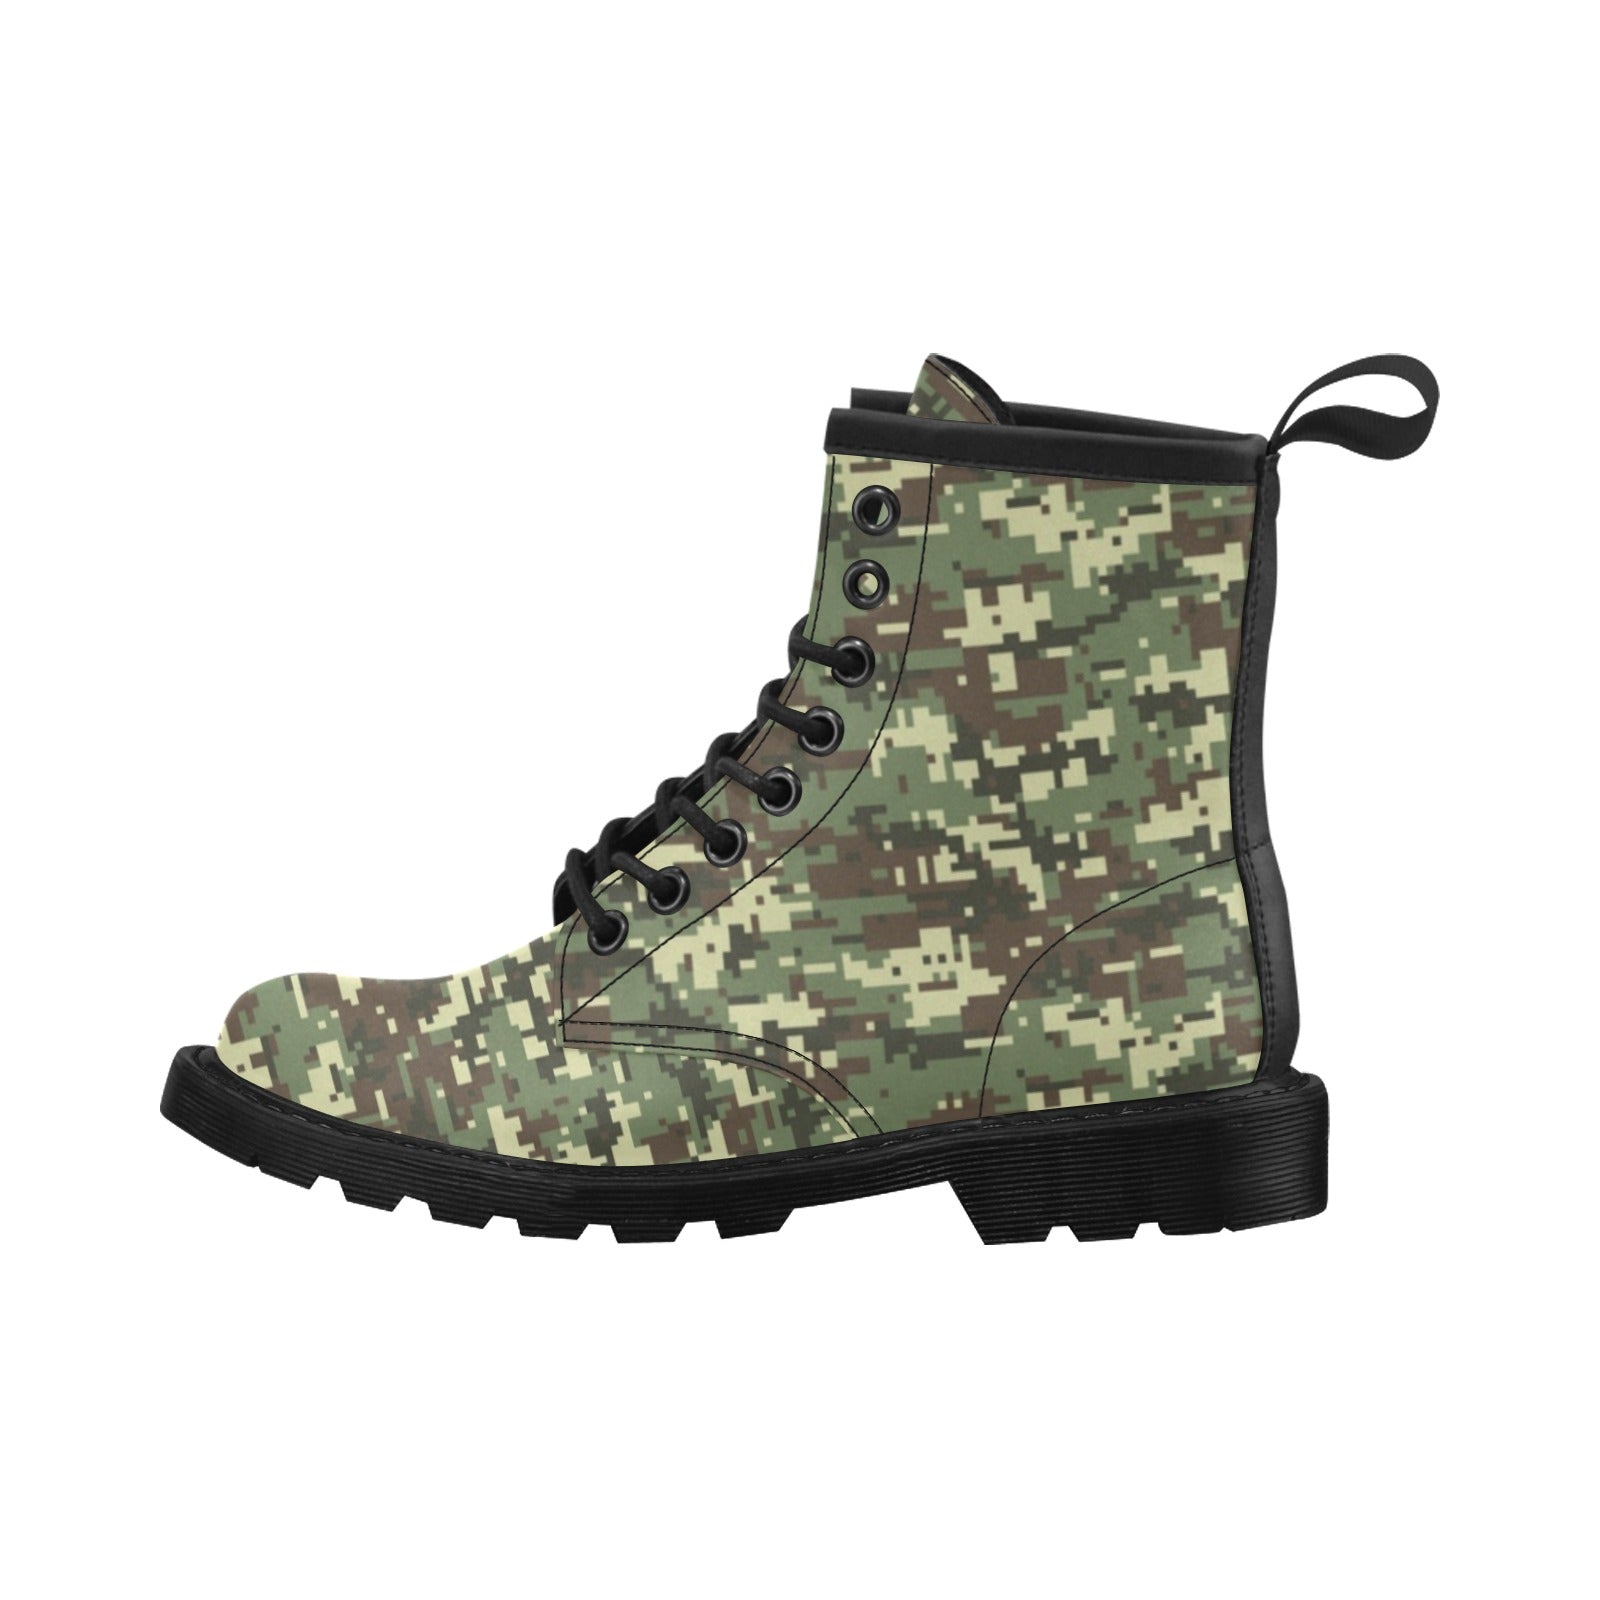 ACU Digital Army Camouflage Women's Boots